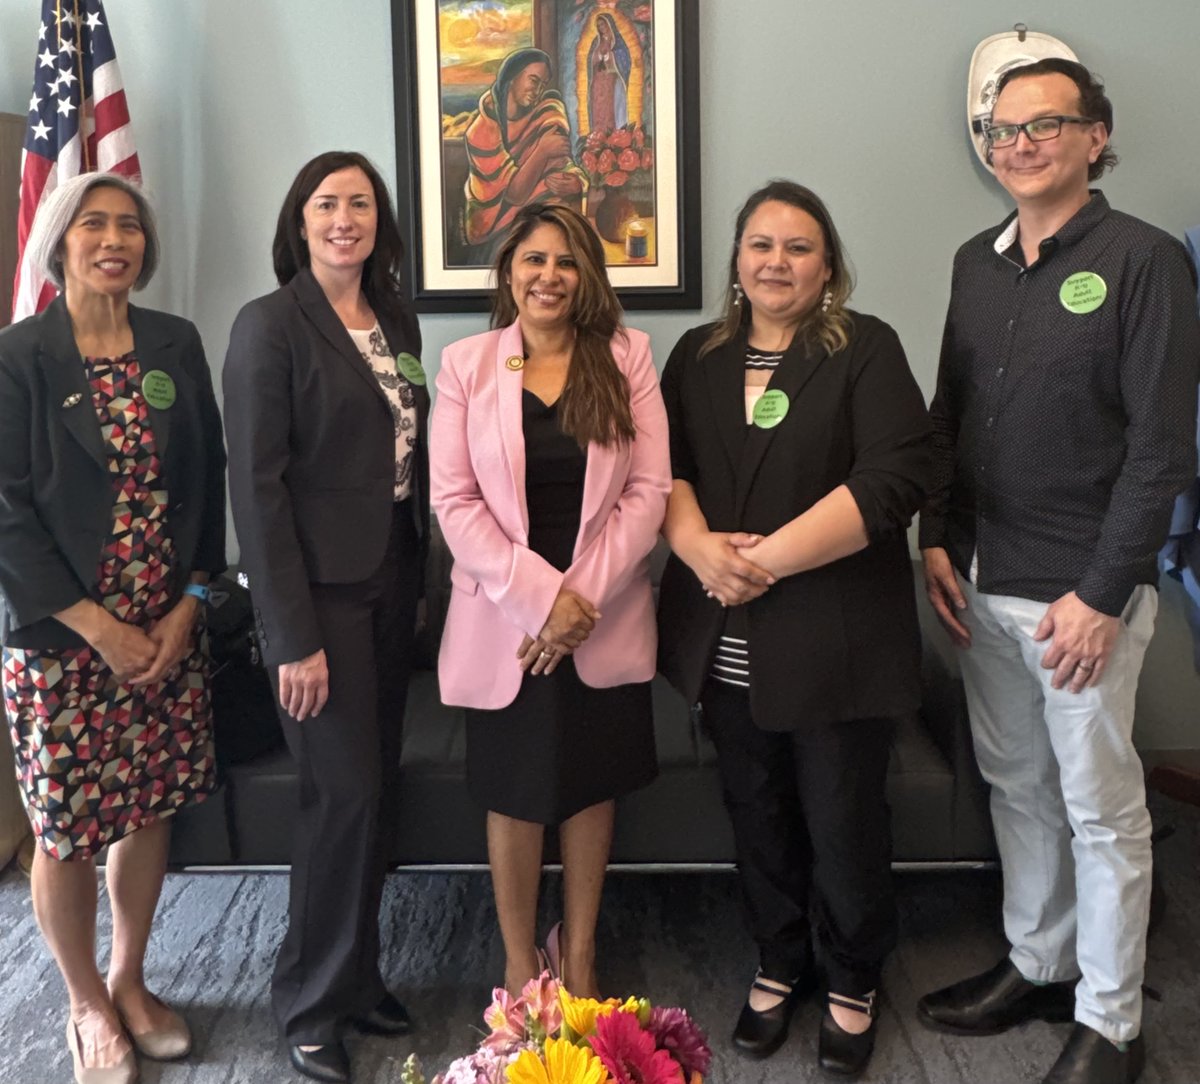 It was great to have Castro Valley Adult and Career Education at the Capitol for their Adult Education Advocacy Day! Adult education plays a crucial role in supporting working families. Thank you for your work in supporting #AD20 families! @CVAdultSchool